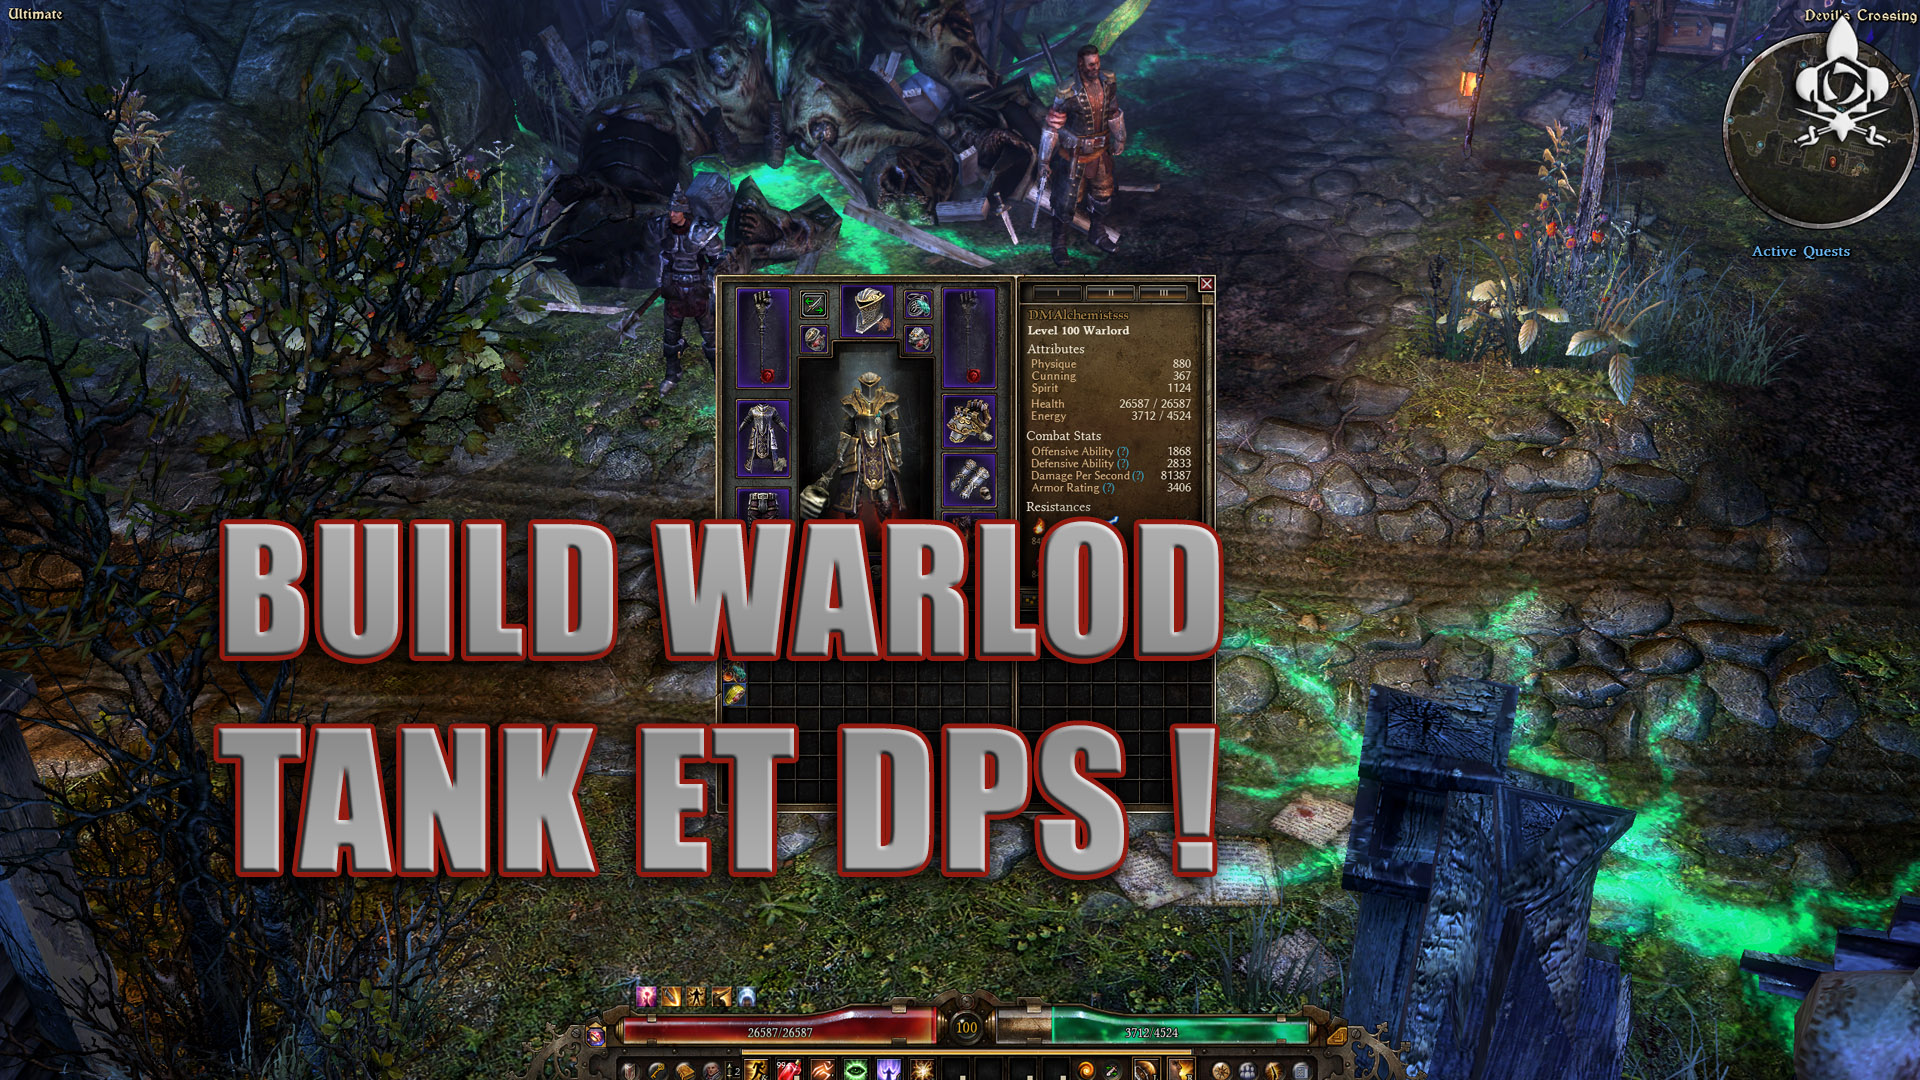 Build Warlord Tank et DPS